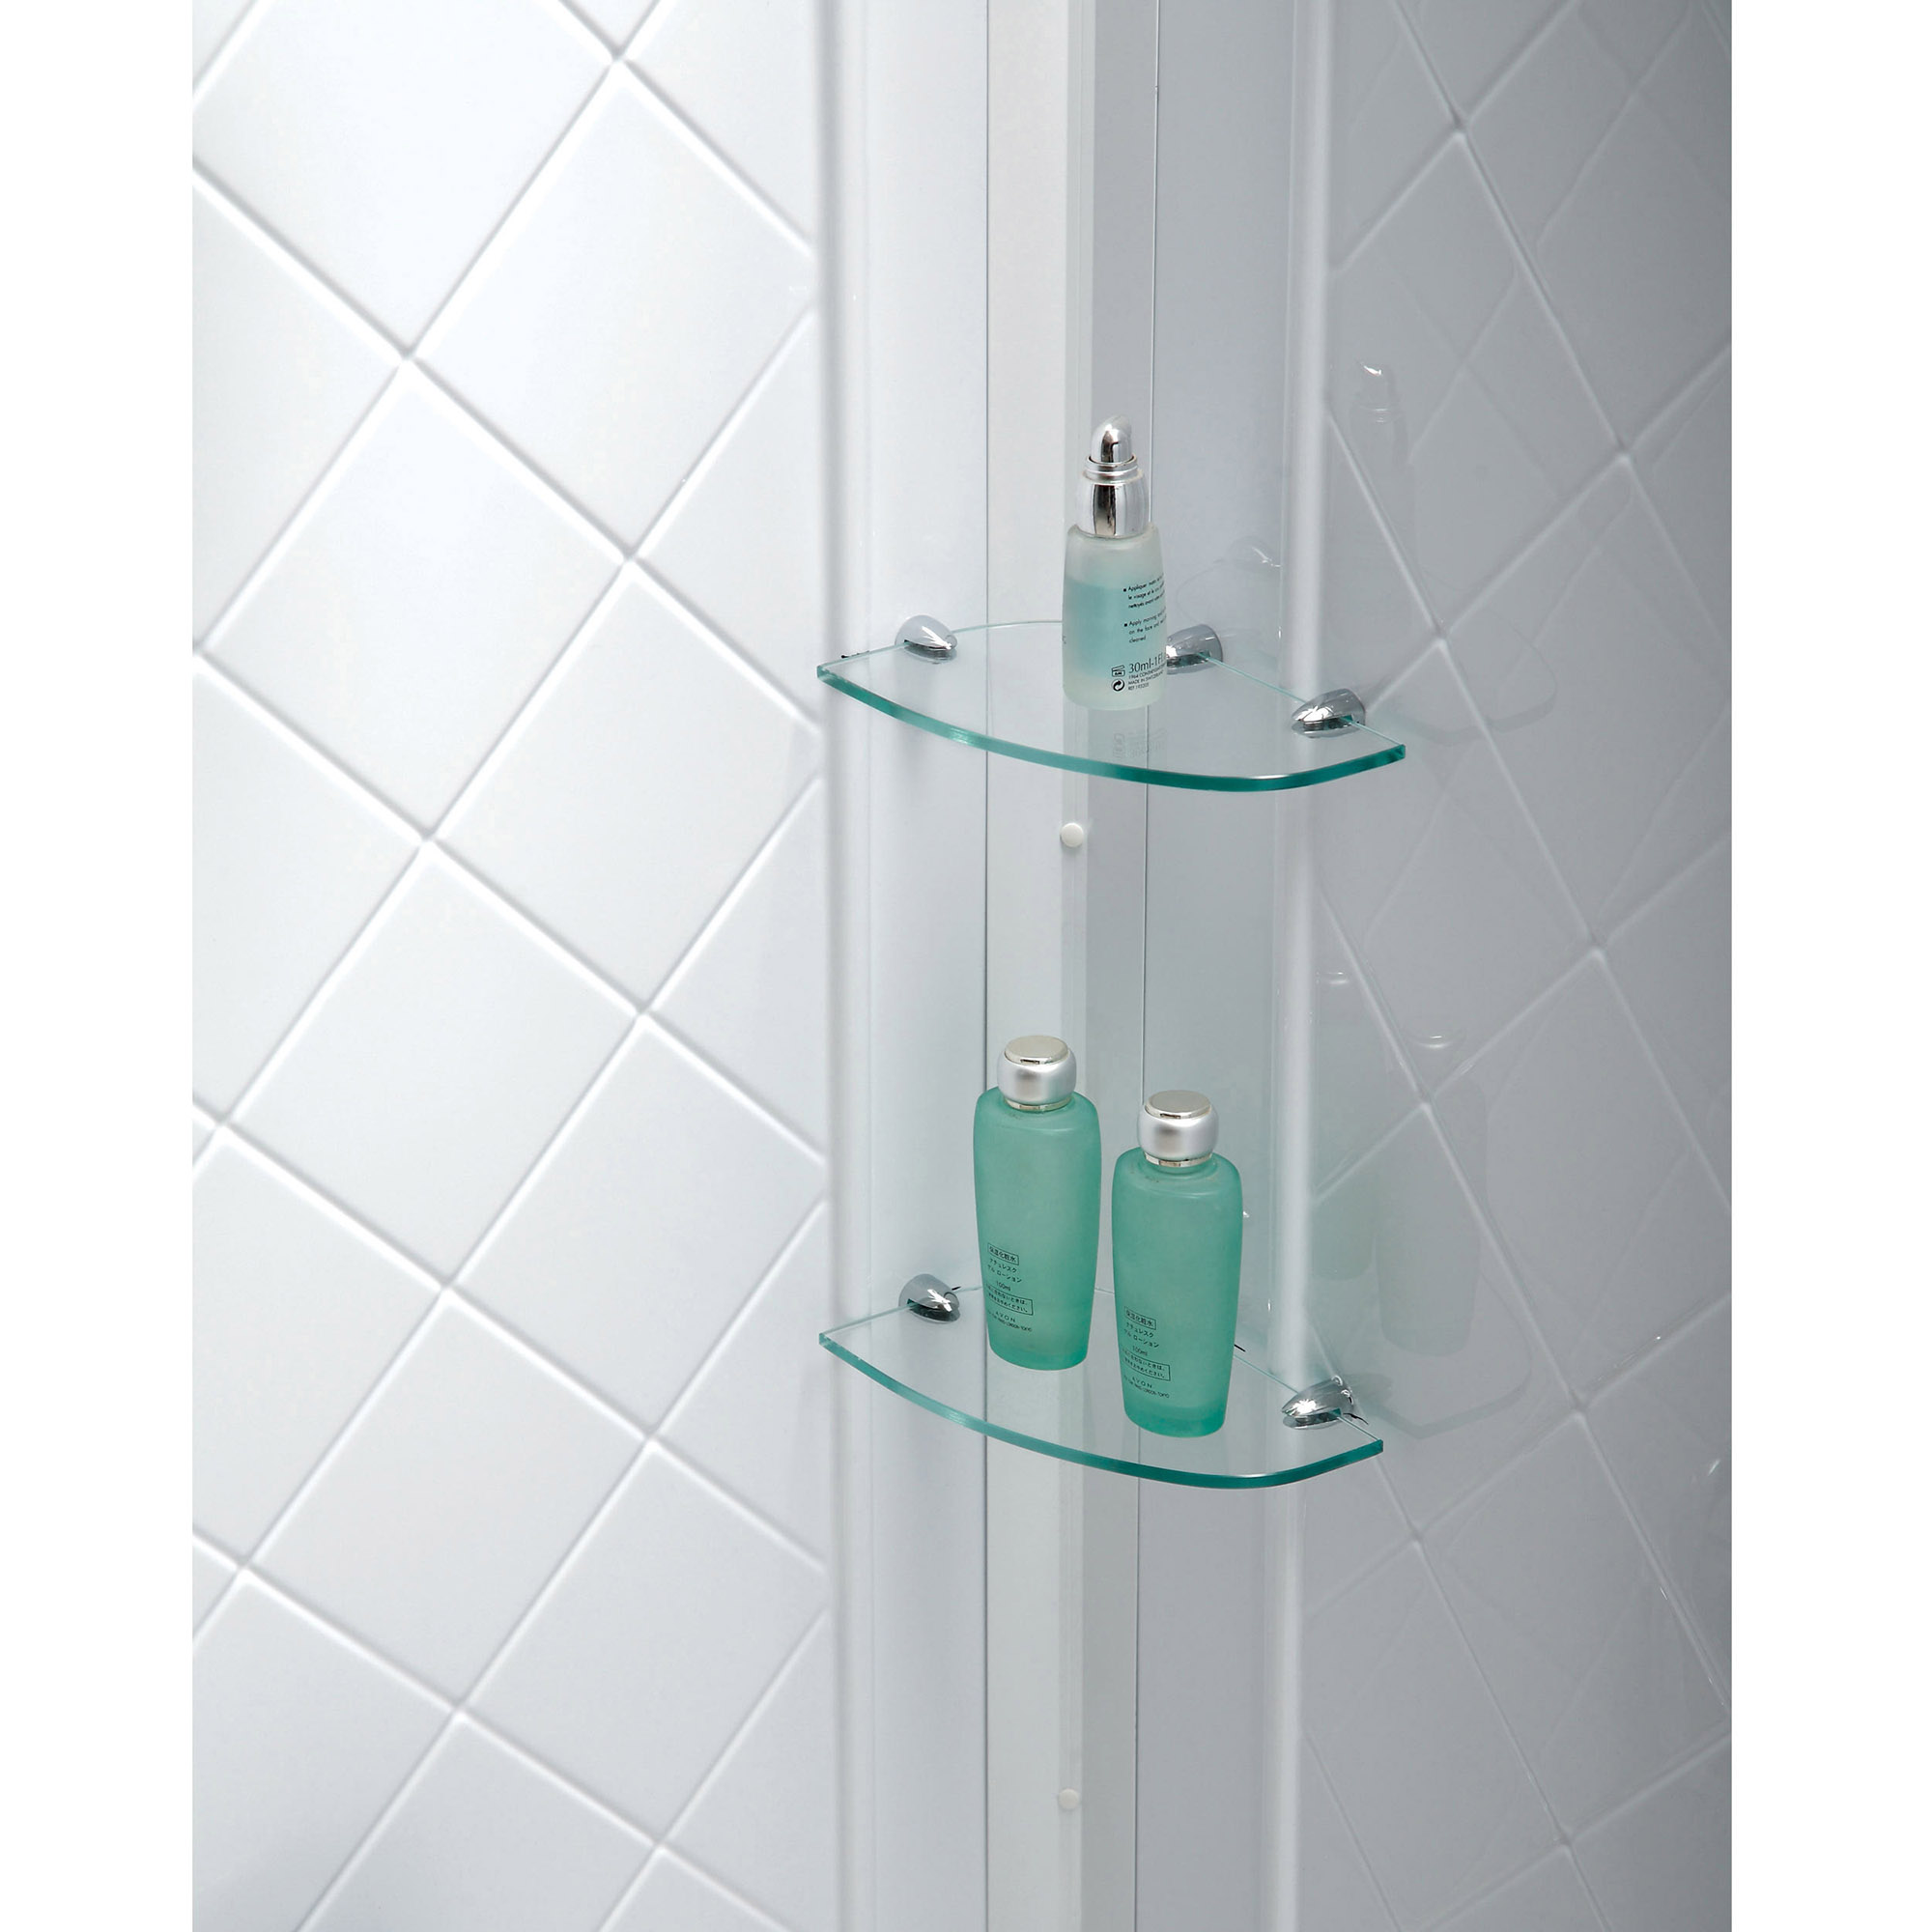 DreamLine Infinity-Z 56-60 in. W x 60 in. H Clear Sliding Tub Door in Brushed Nickel with White Acrylic Backwall Kit - image 9 of 14